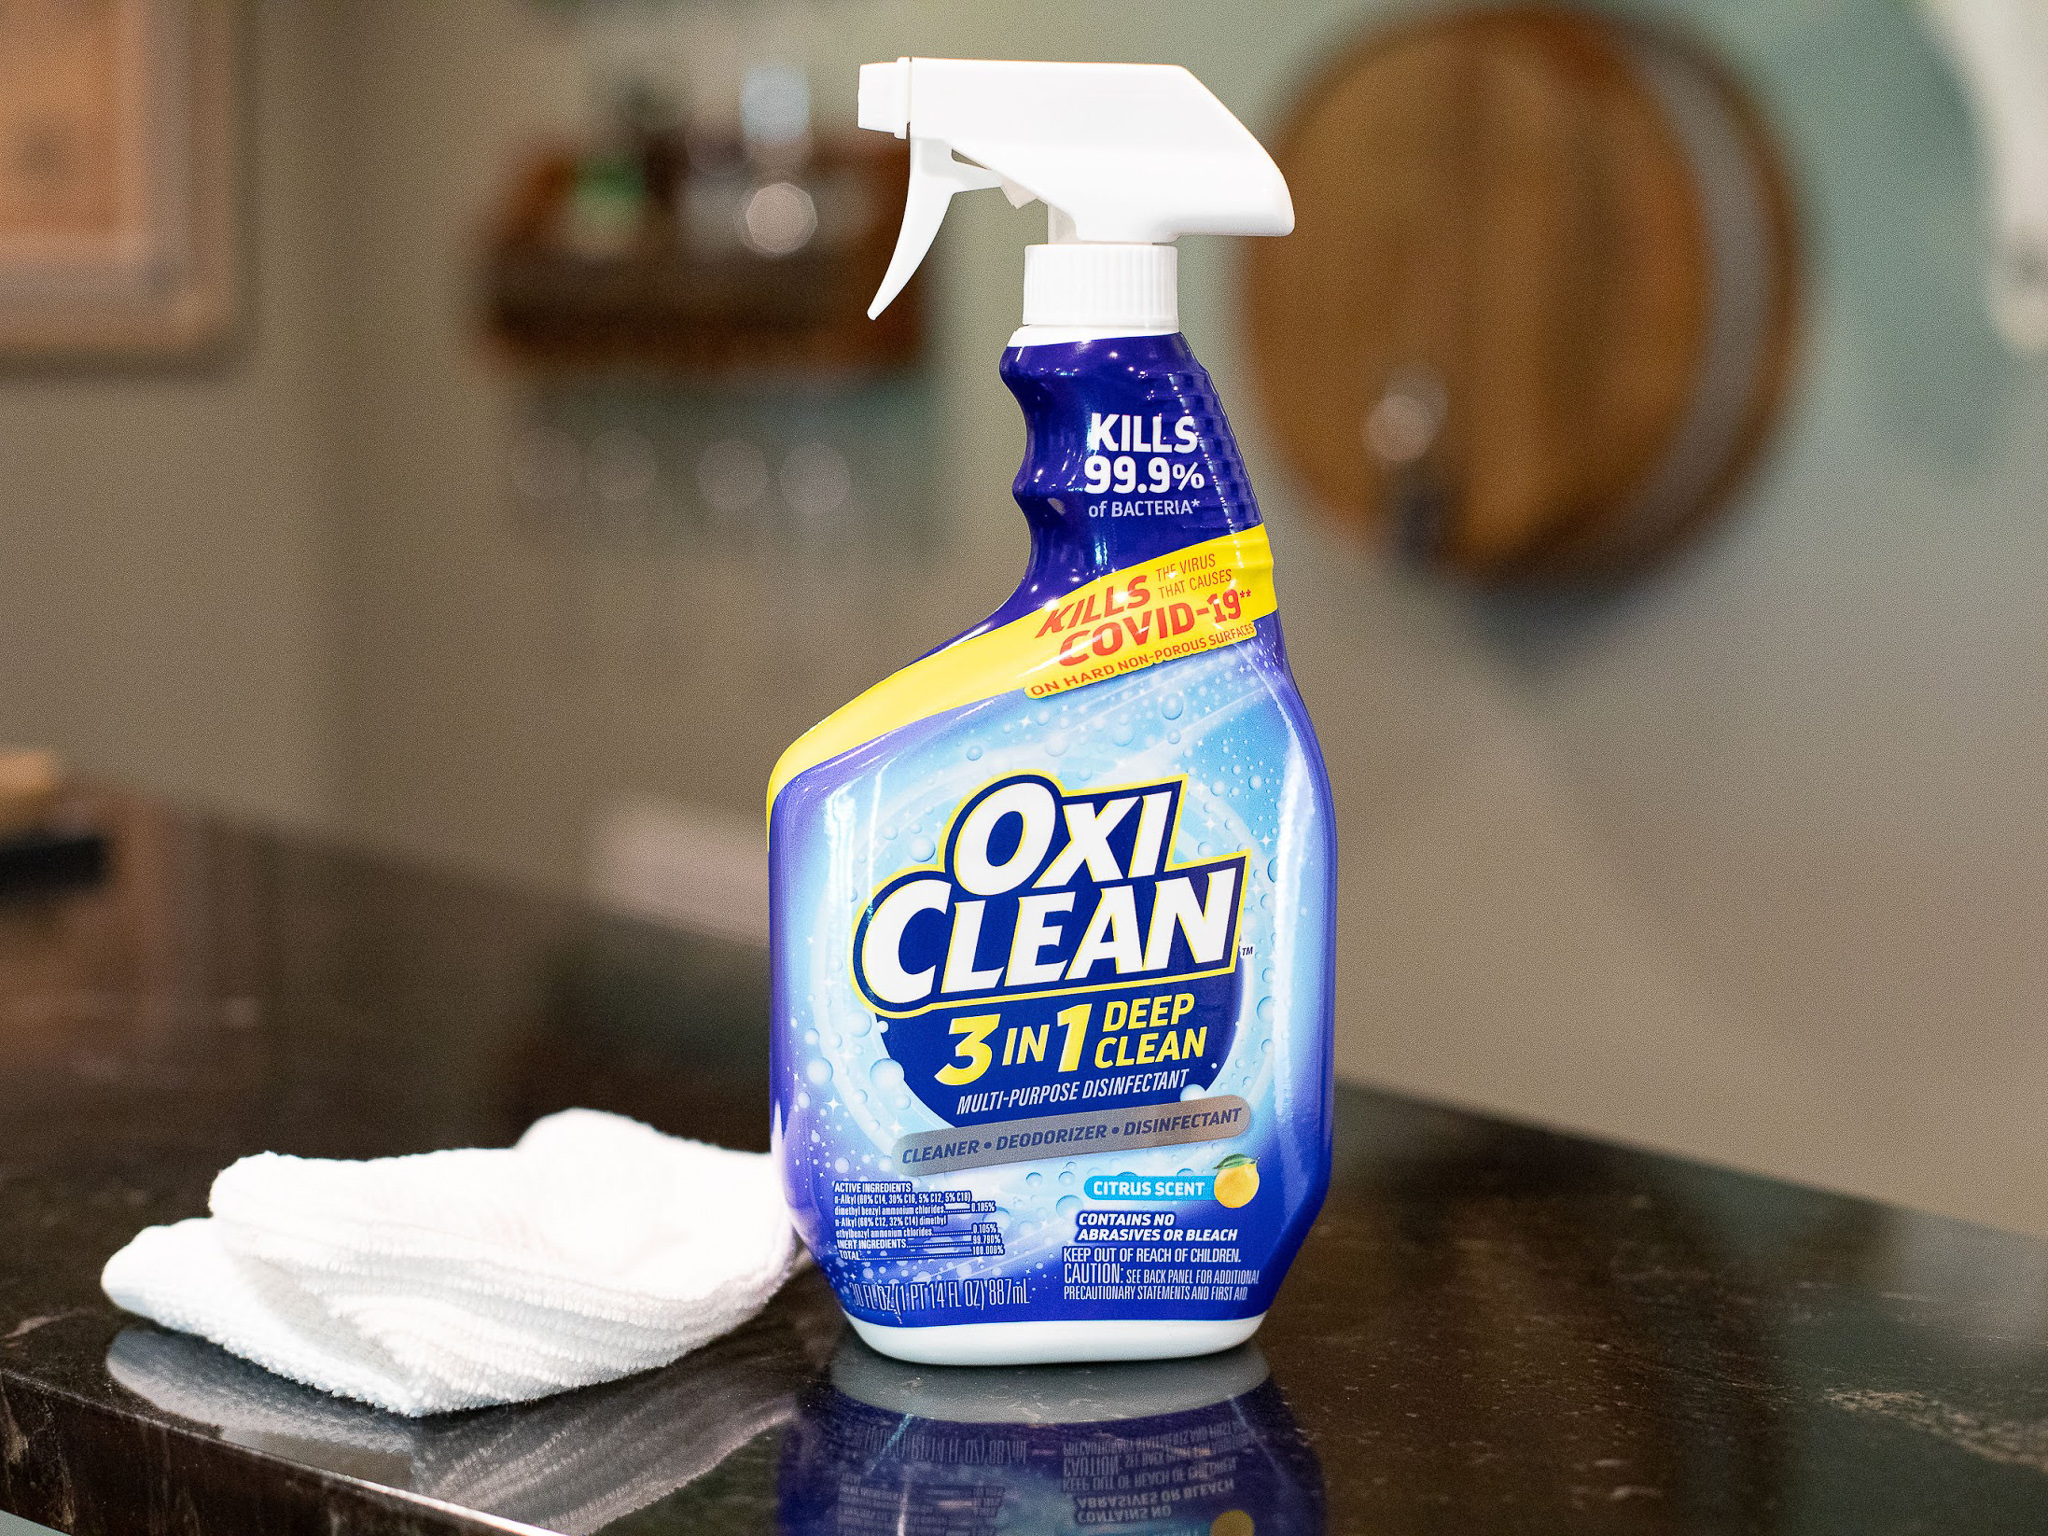 New OxiClean™ Multi-Purpose Disinfectant Cleaners Are Now Available At Publix - Clean & Disinfect Household Surfaces With The Power Of OxiClean™ on I Heart Publix 1